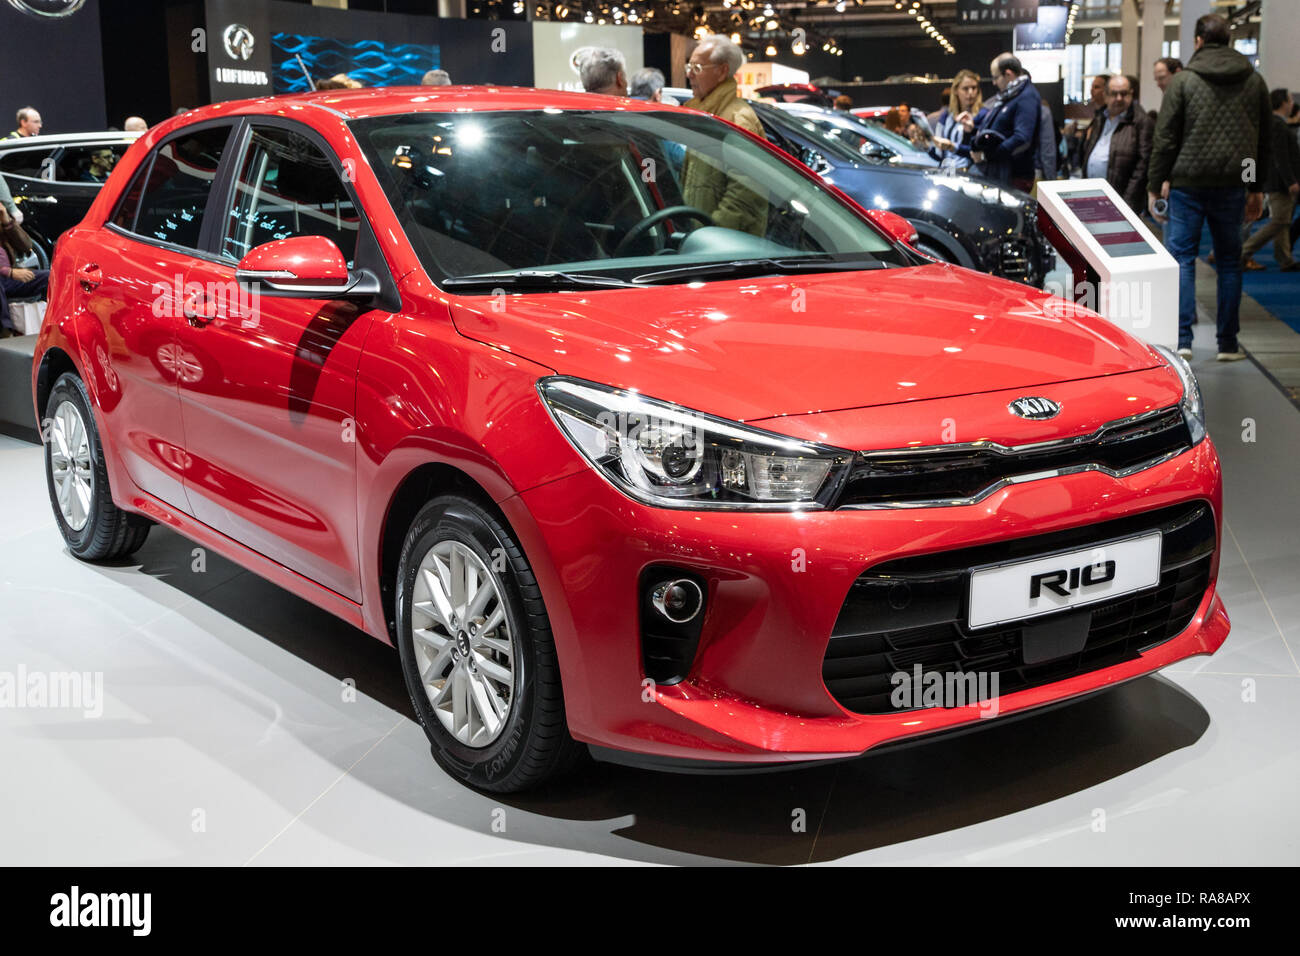 BRUSSELS - JAN 19, 2017: Kia Rio car presented at the Brussels Autosalon Motor Show. Stock Photo